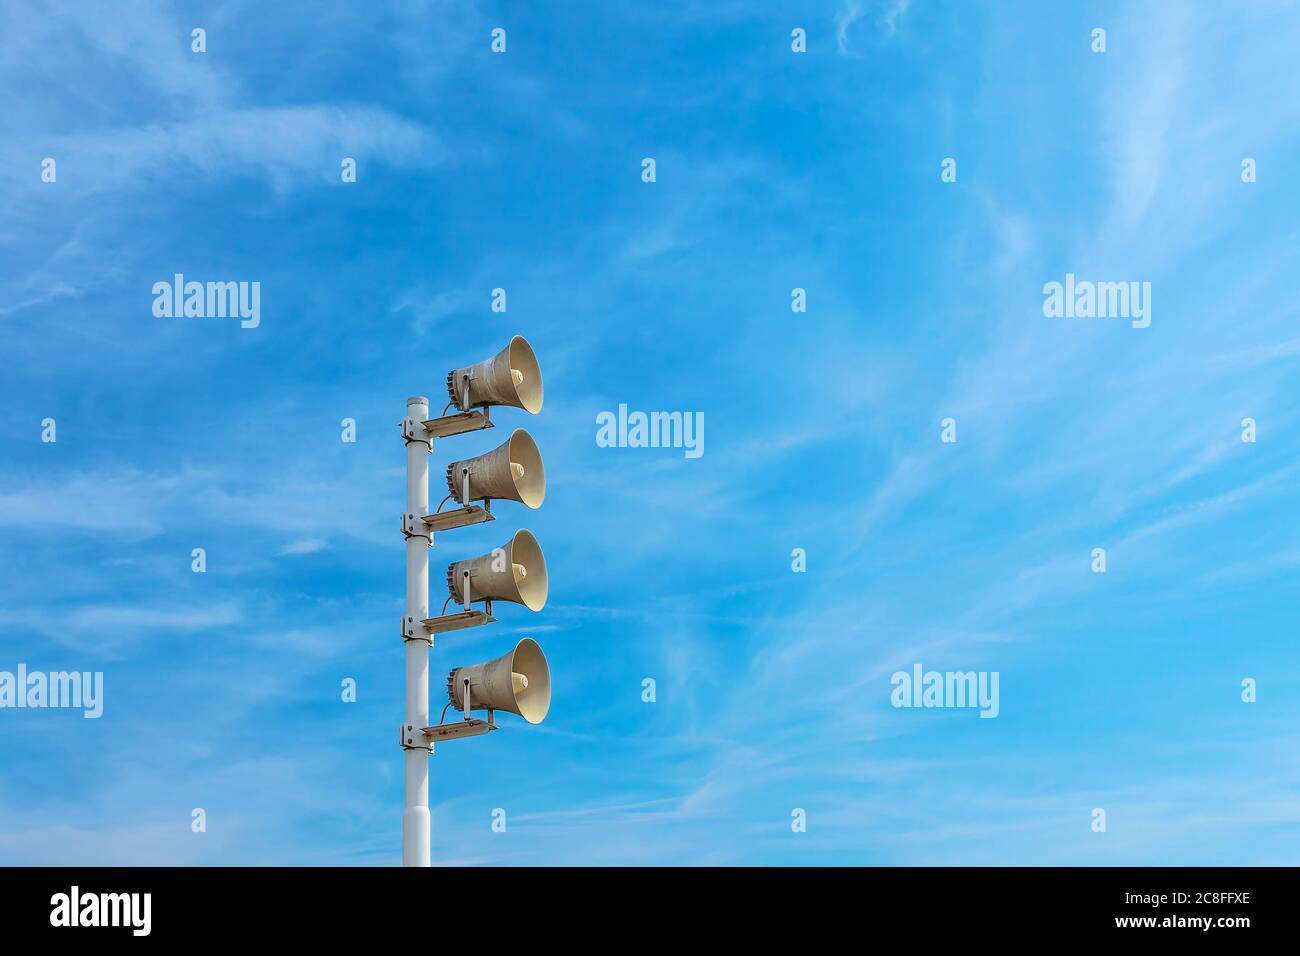 Row of outdoor megaphones against a blue sky Stock Photo